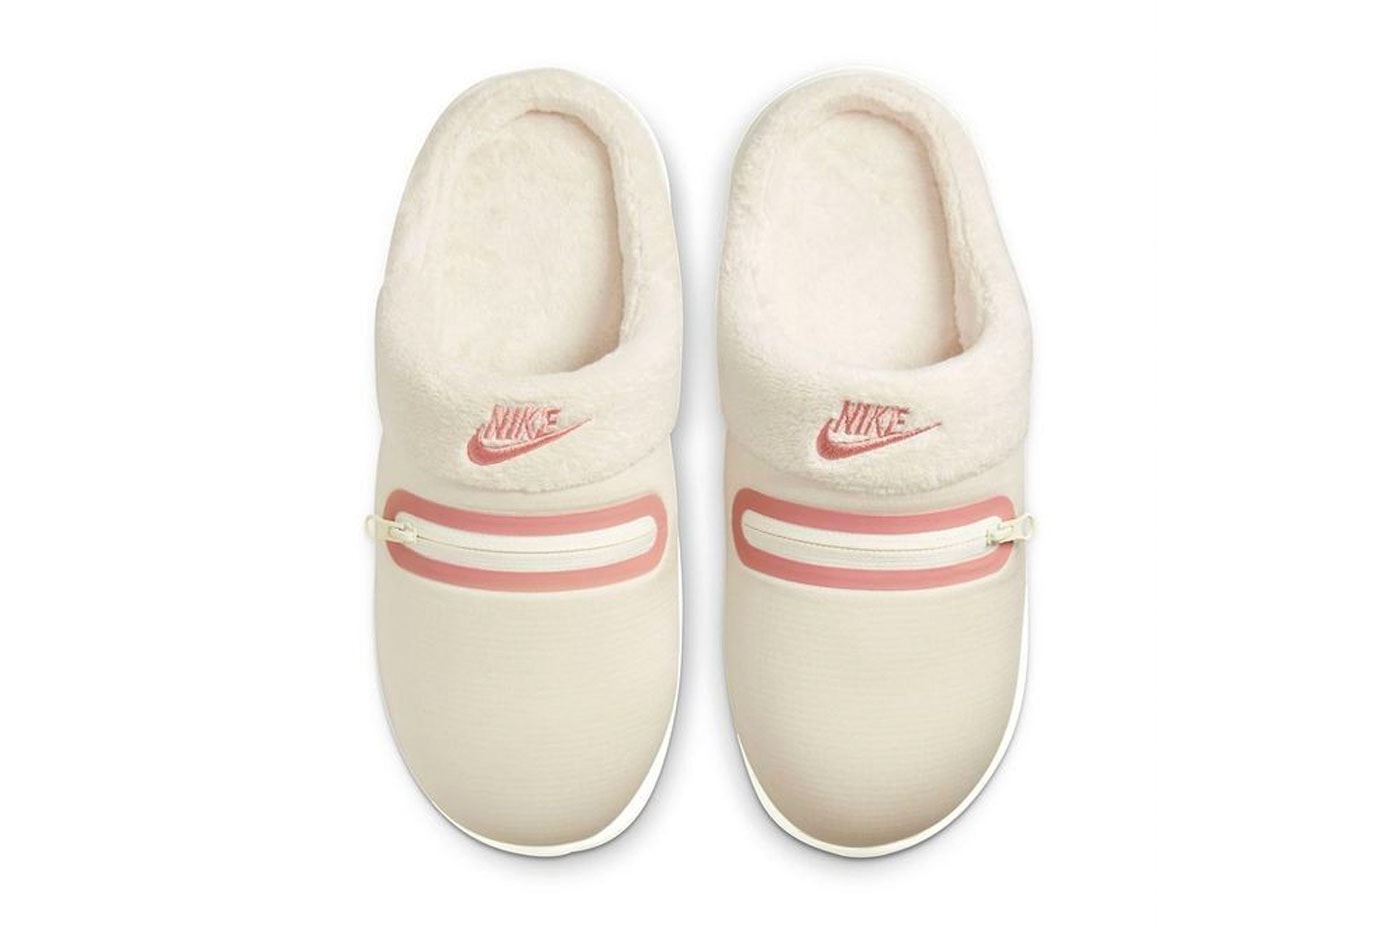 Nike Elevates the Coziness With a New Ivory Colorway for Its Fleecy Burrow Slippers marshmallow soft indoor outdoor mules winter